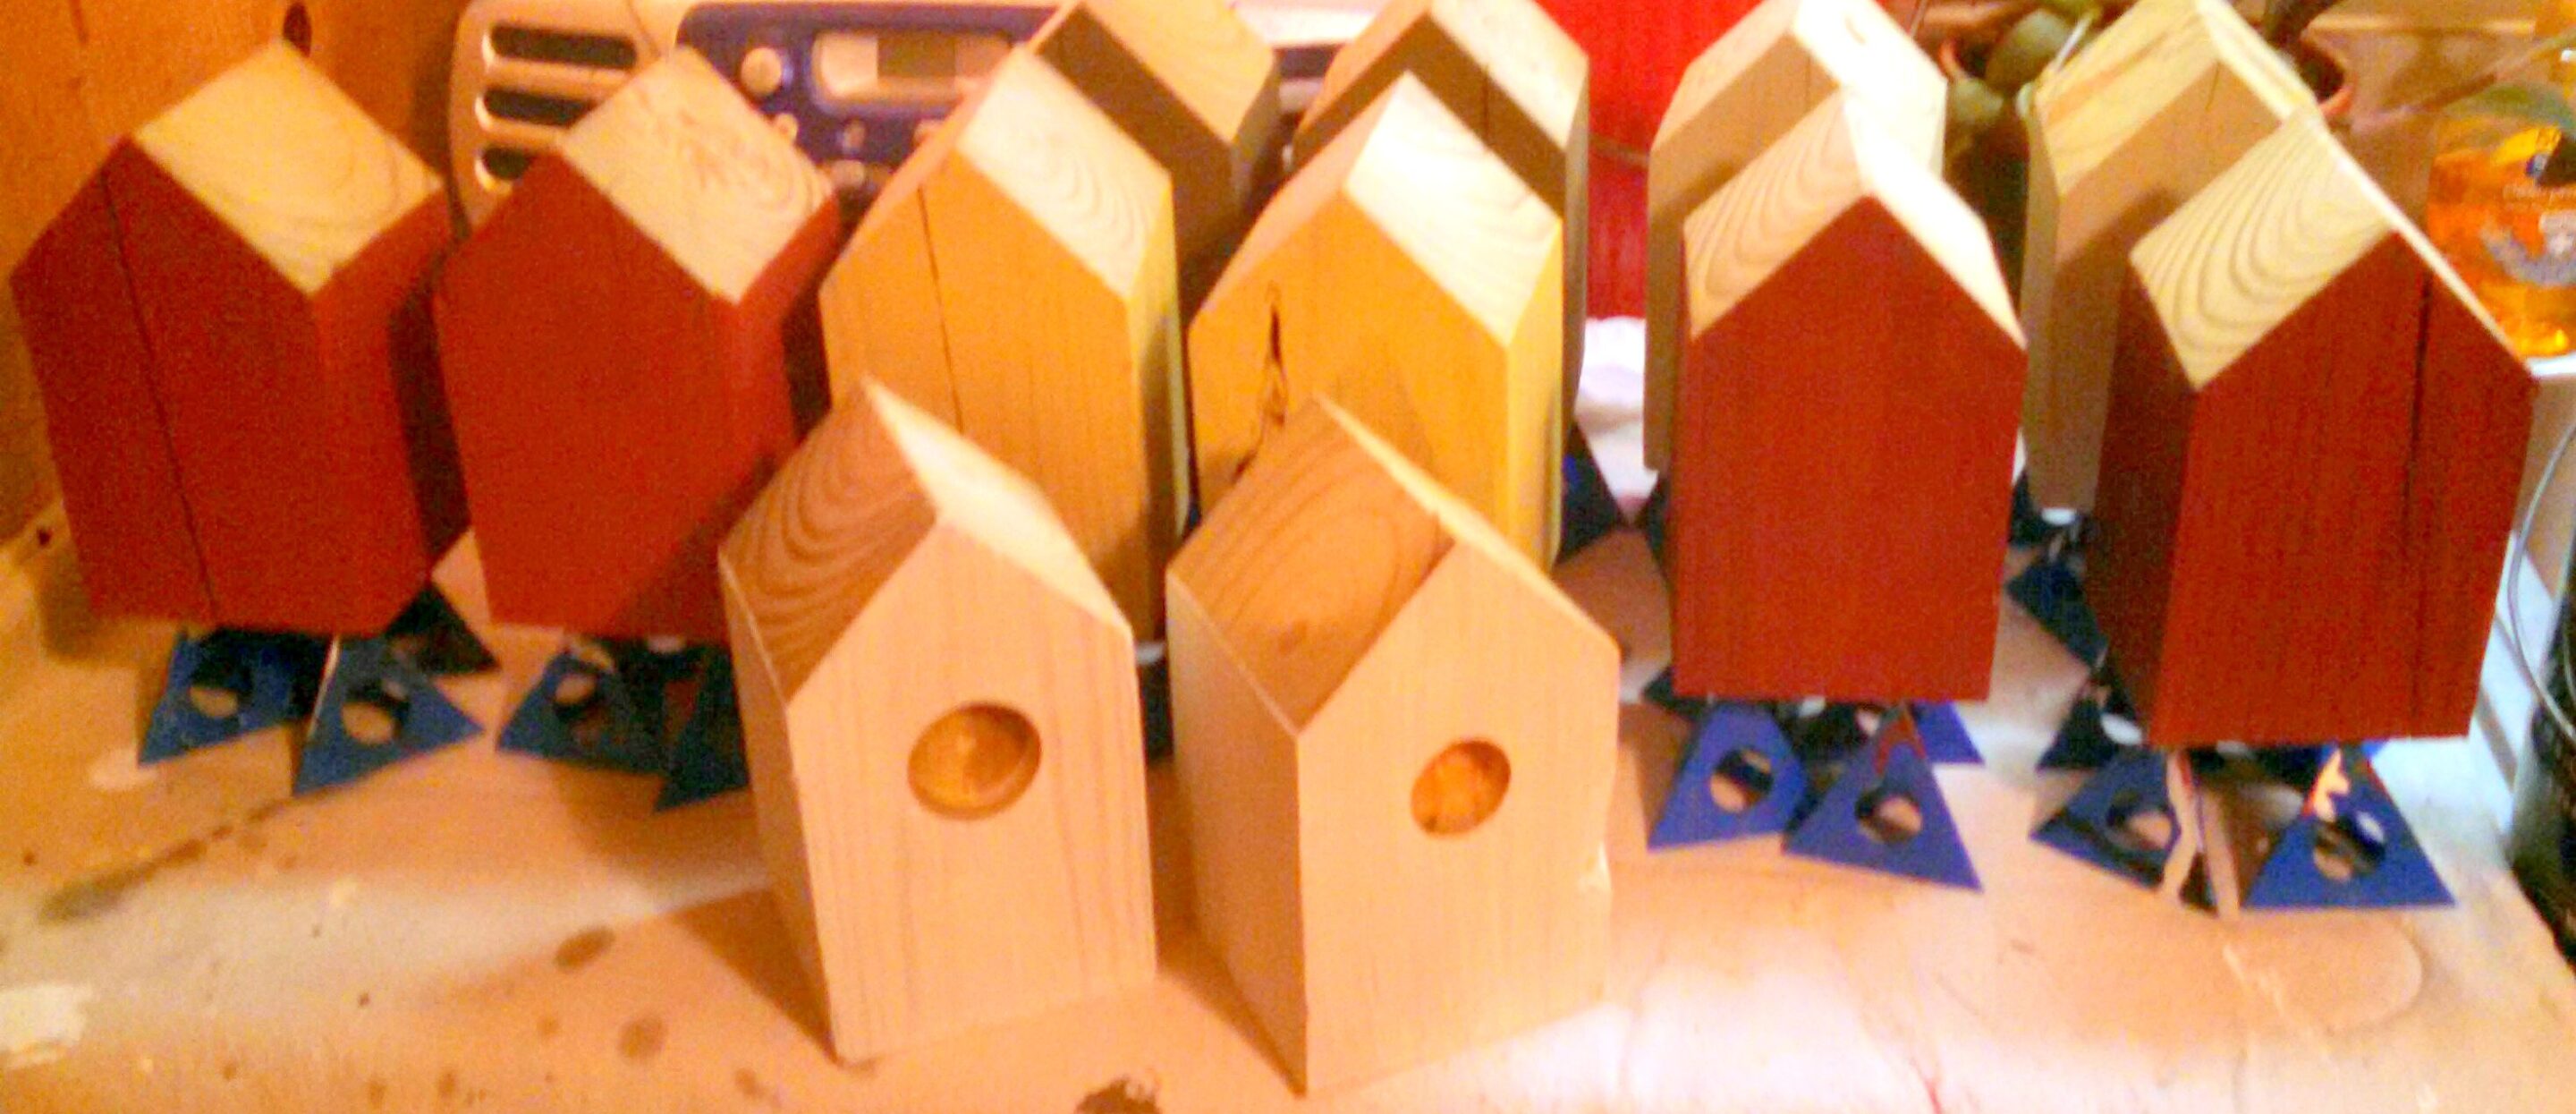 Birdhouses being painted